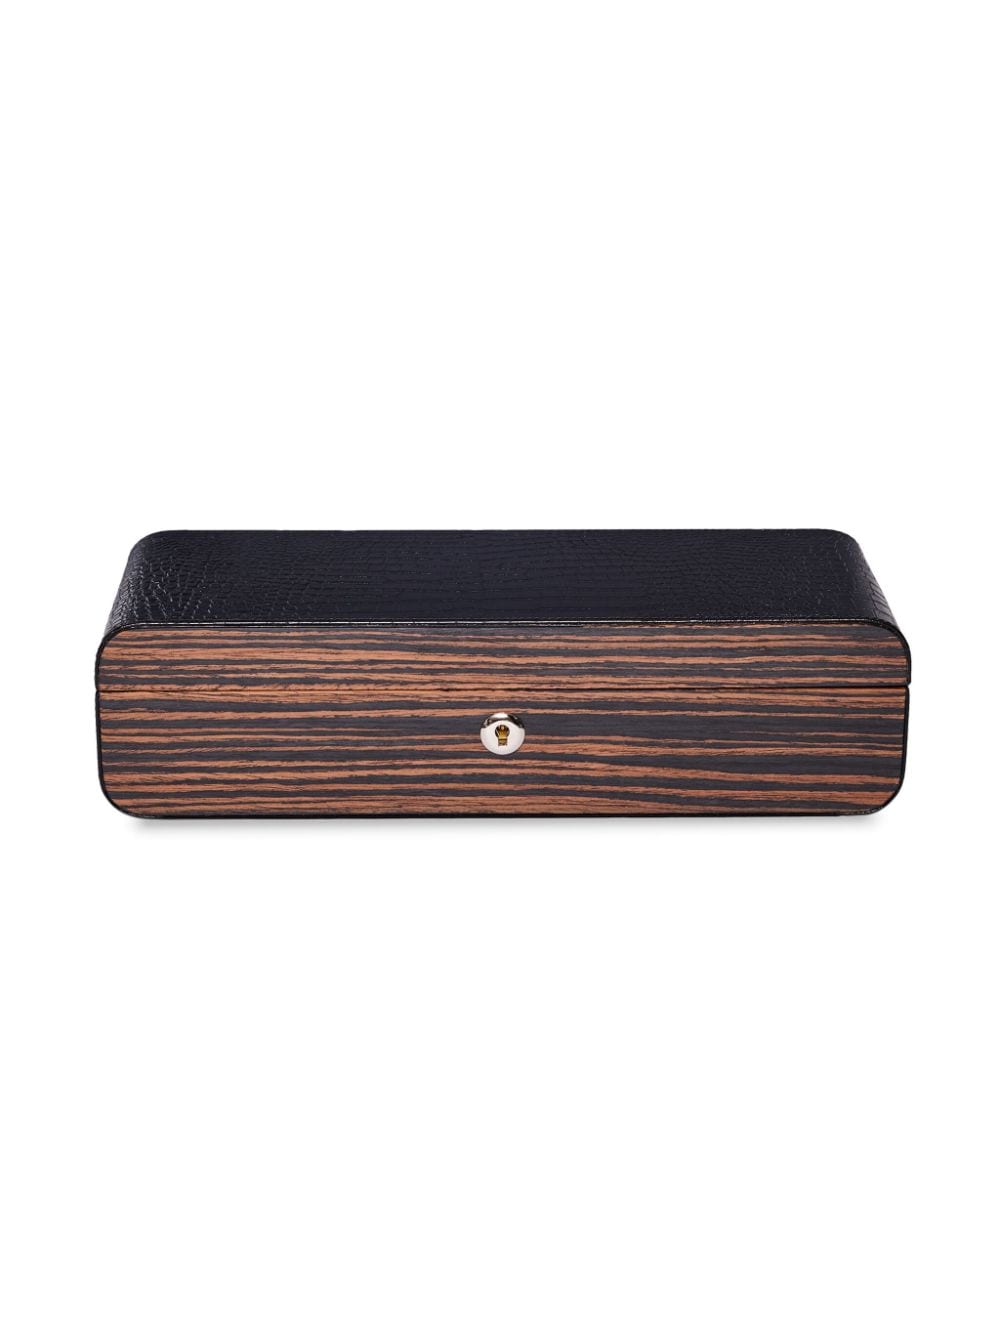 Image 2 of Rapport Mayfair wood watch box